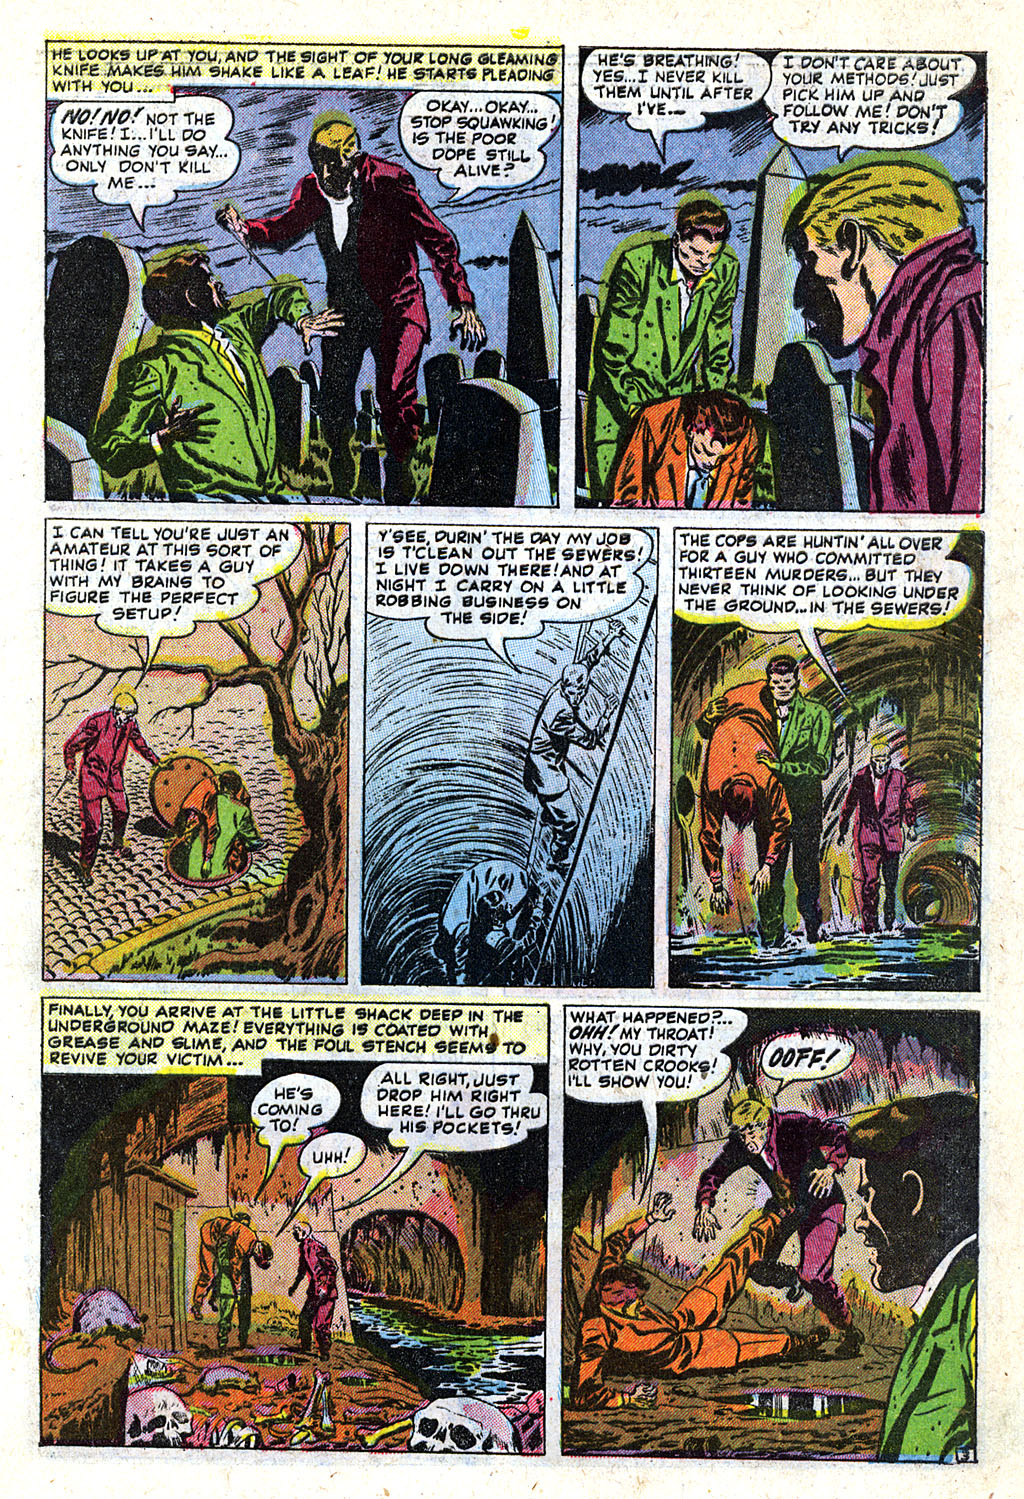 Marvel Tales (1949) 107 Page 4